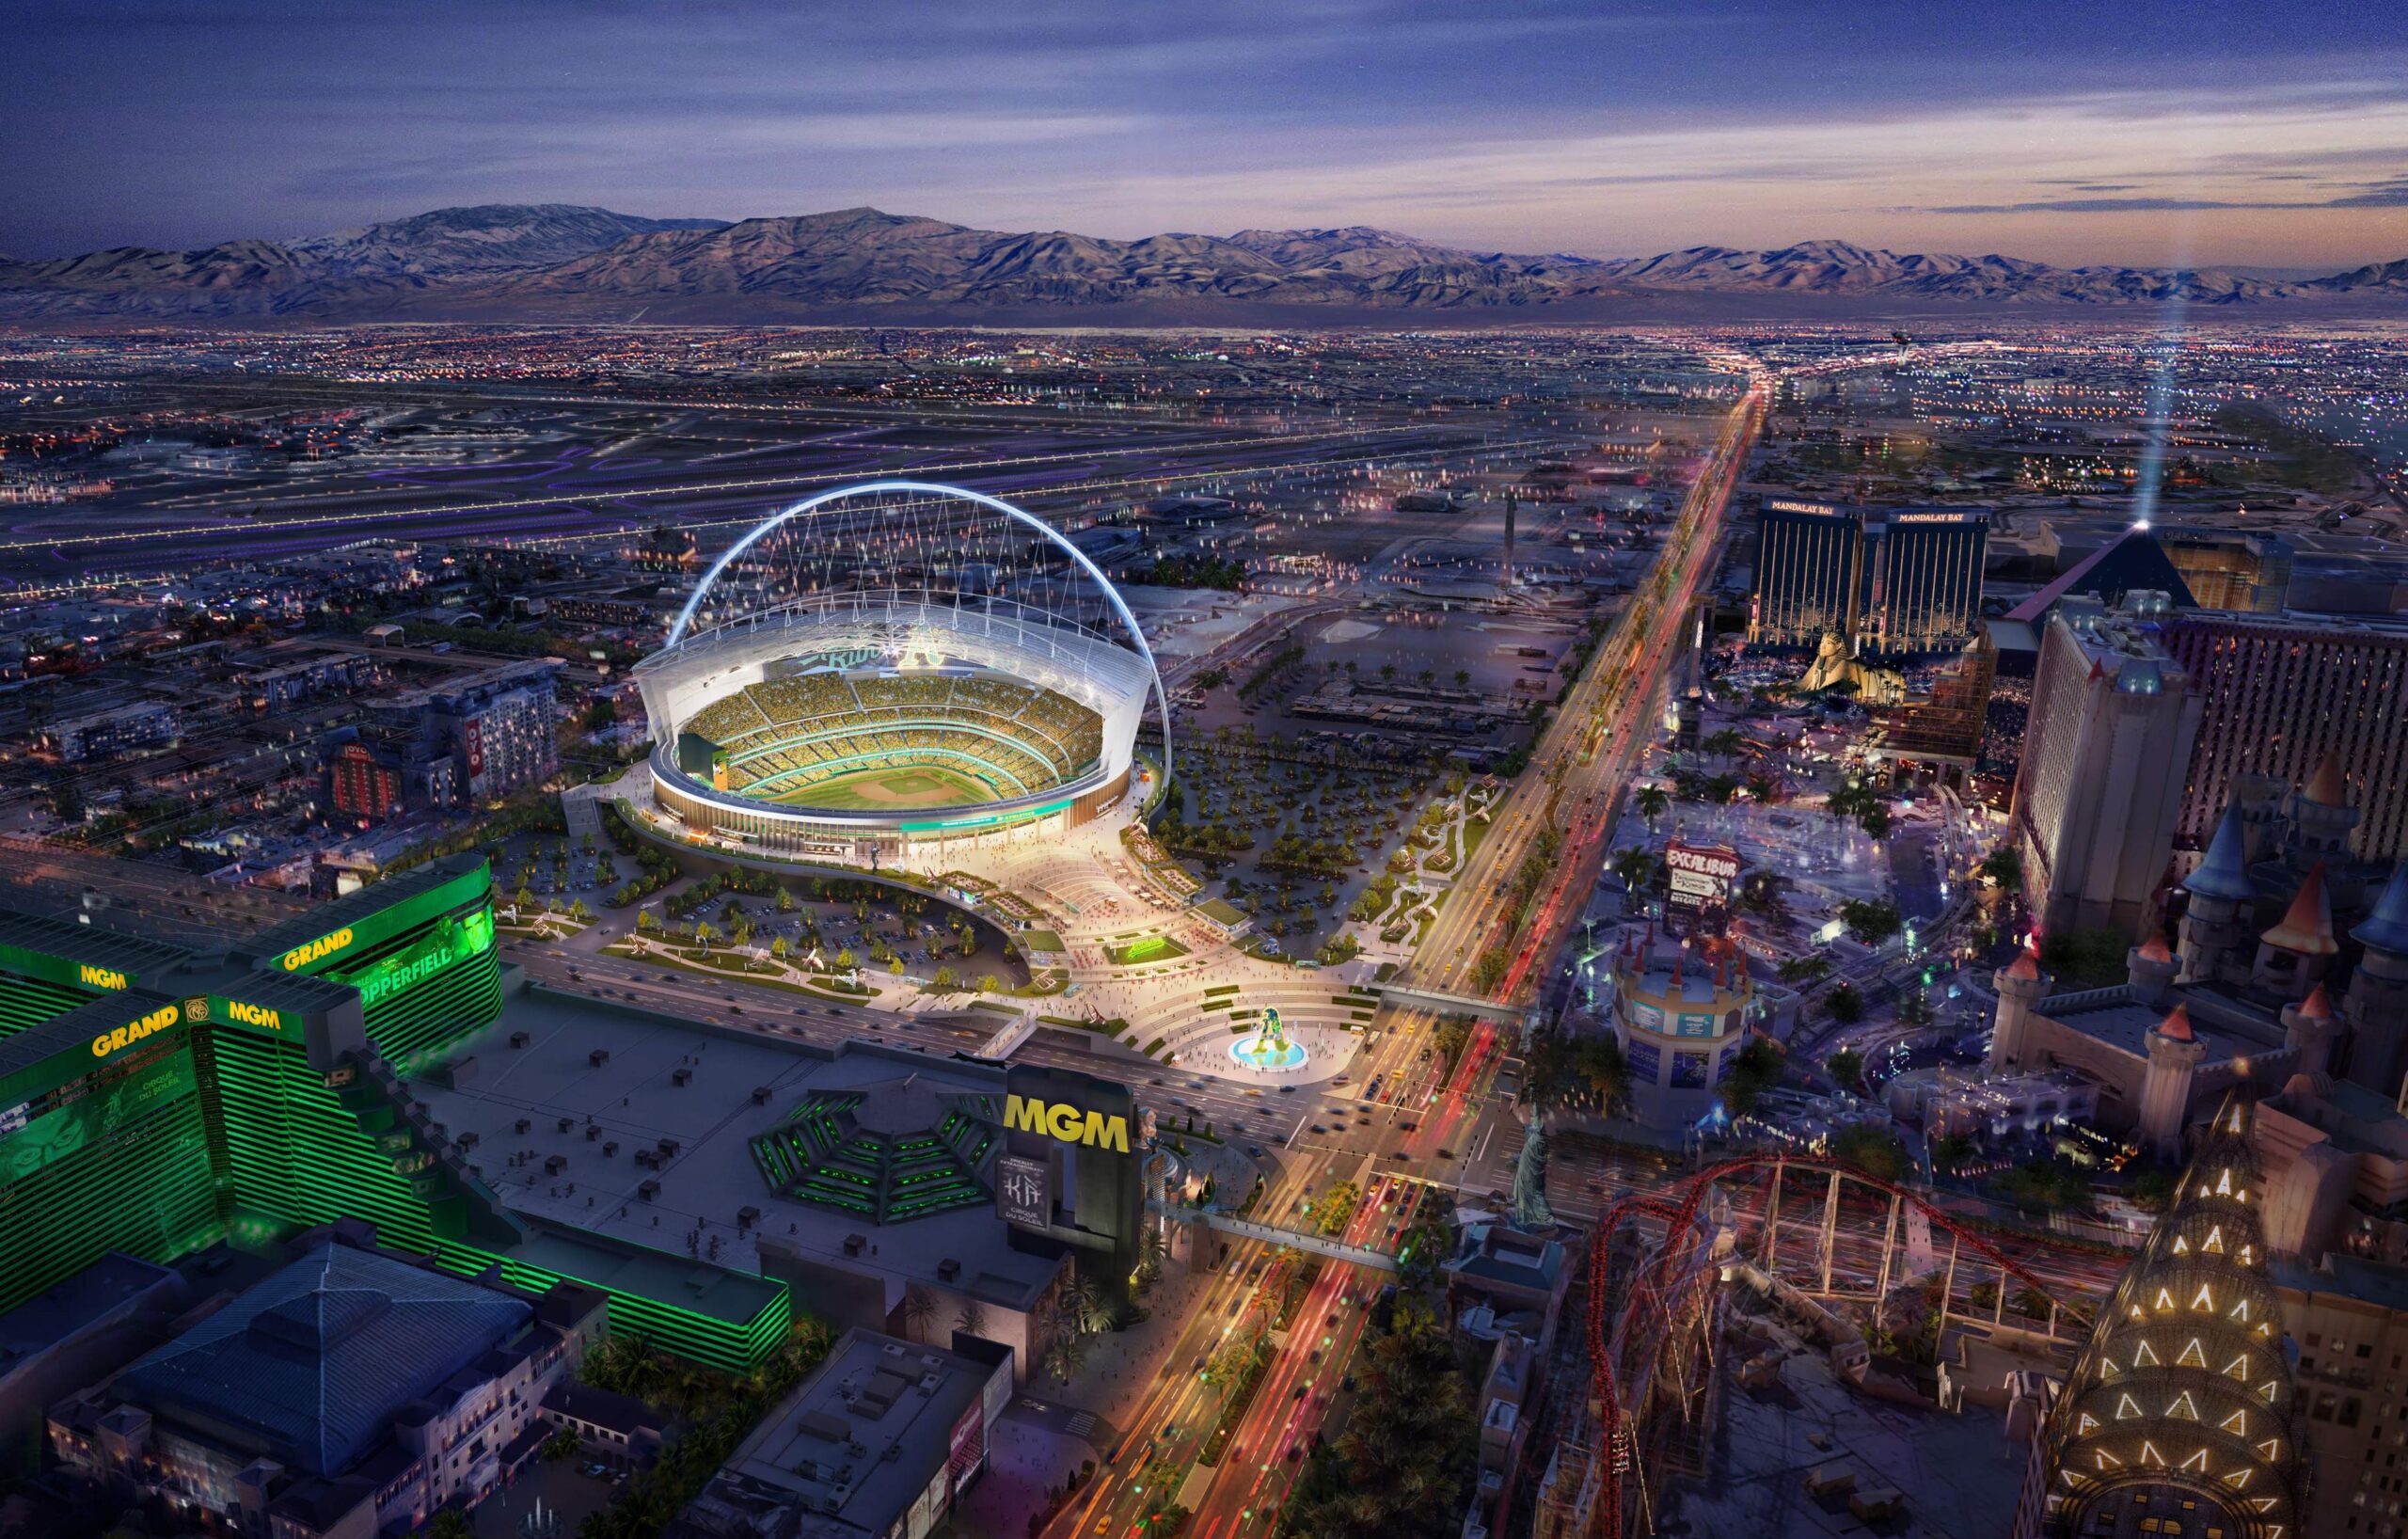 A rendering of the A's proposed $1.5 billion, 30,000-seat, retractable roof ballpark on the Strip and Tropicana Avenue. (Courtesy Oakland A's).